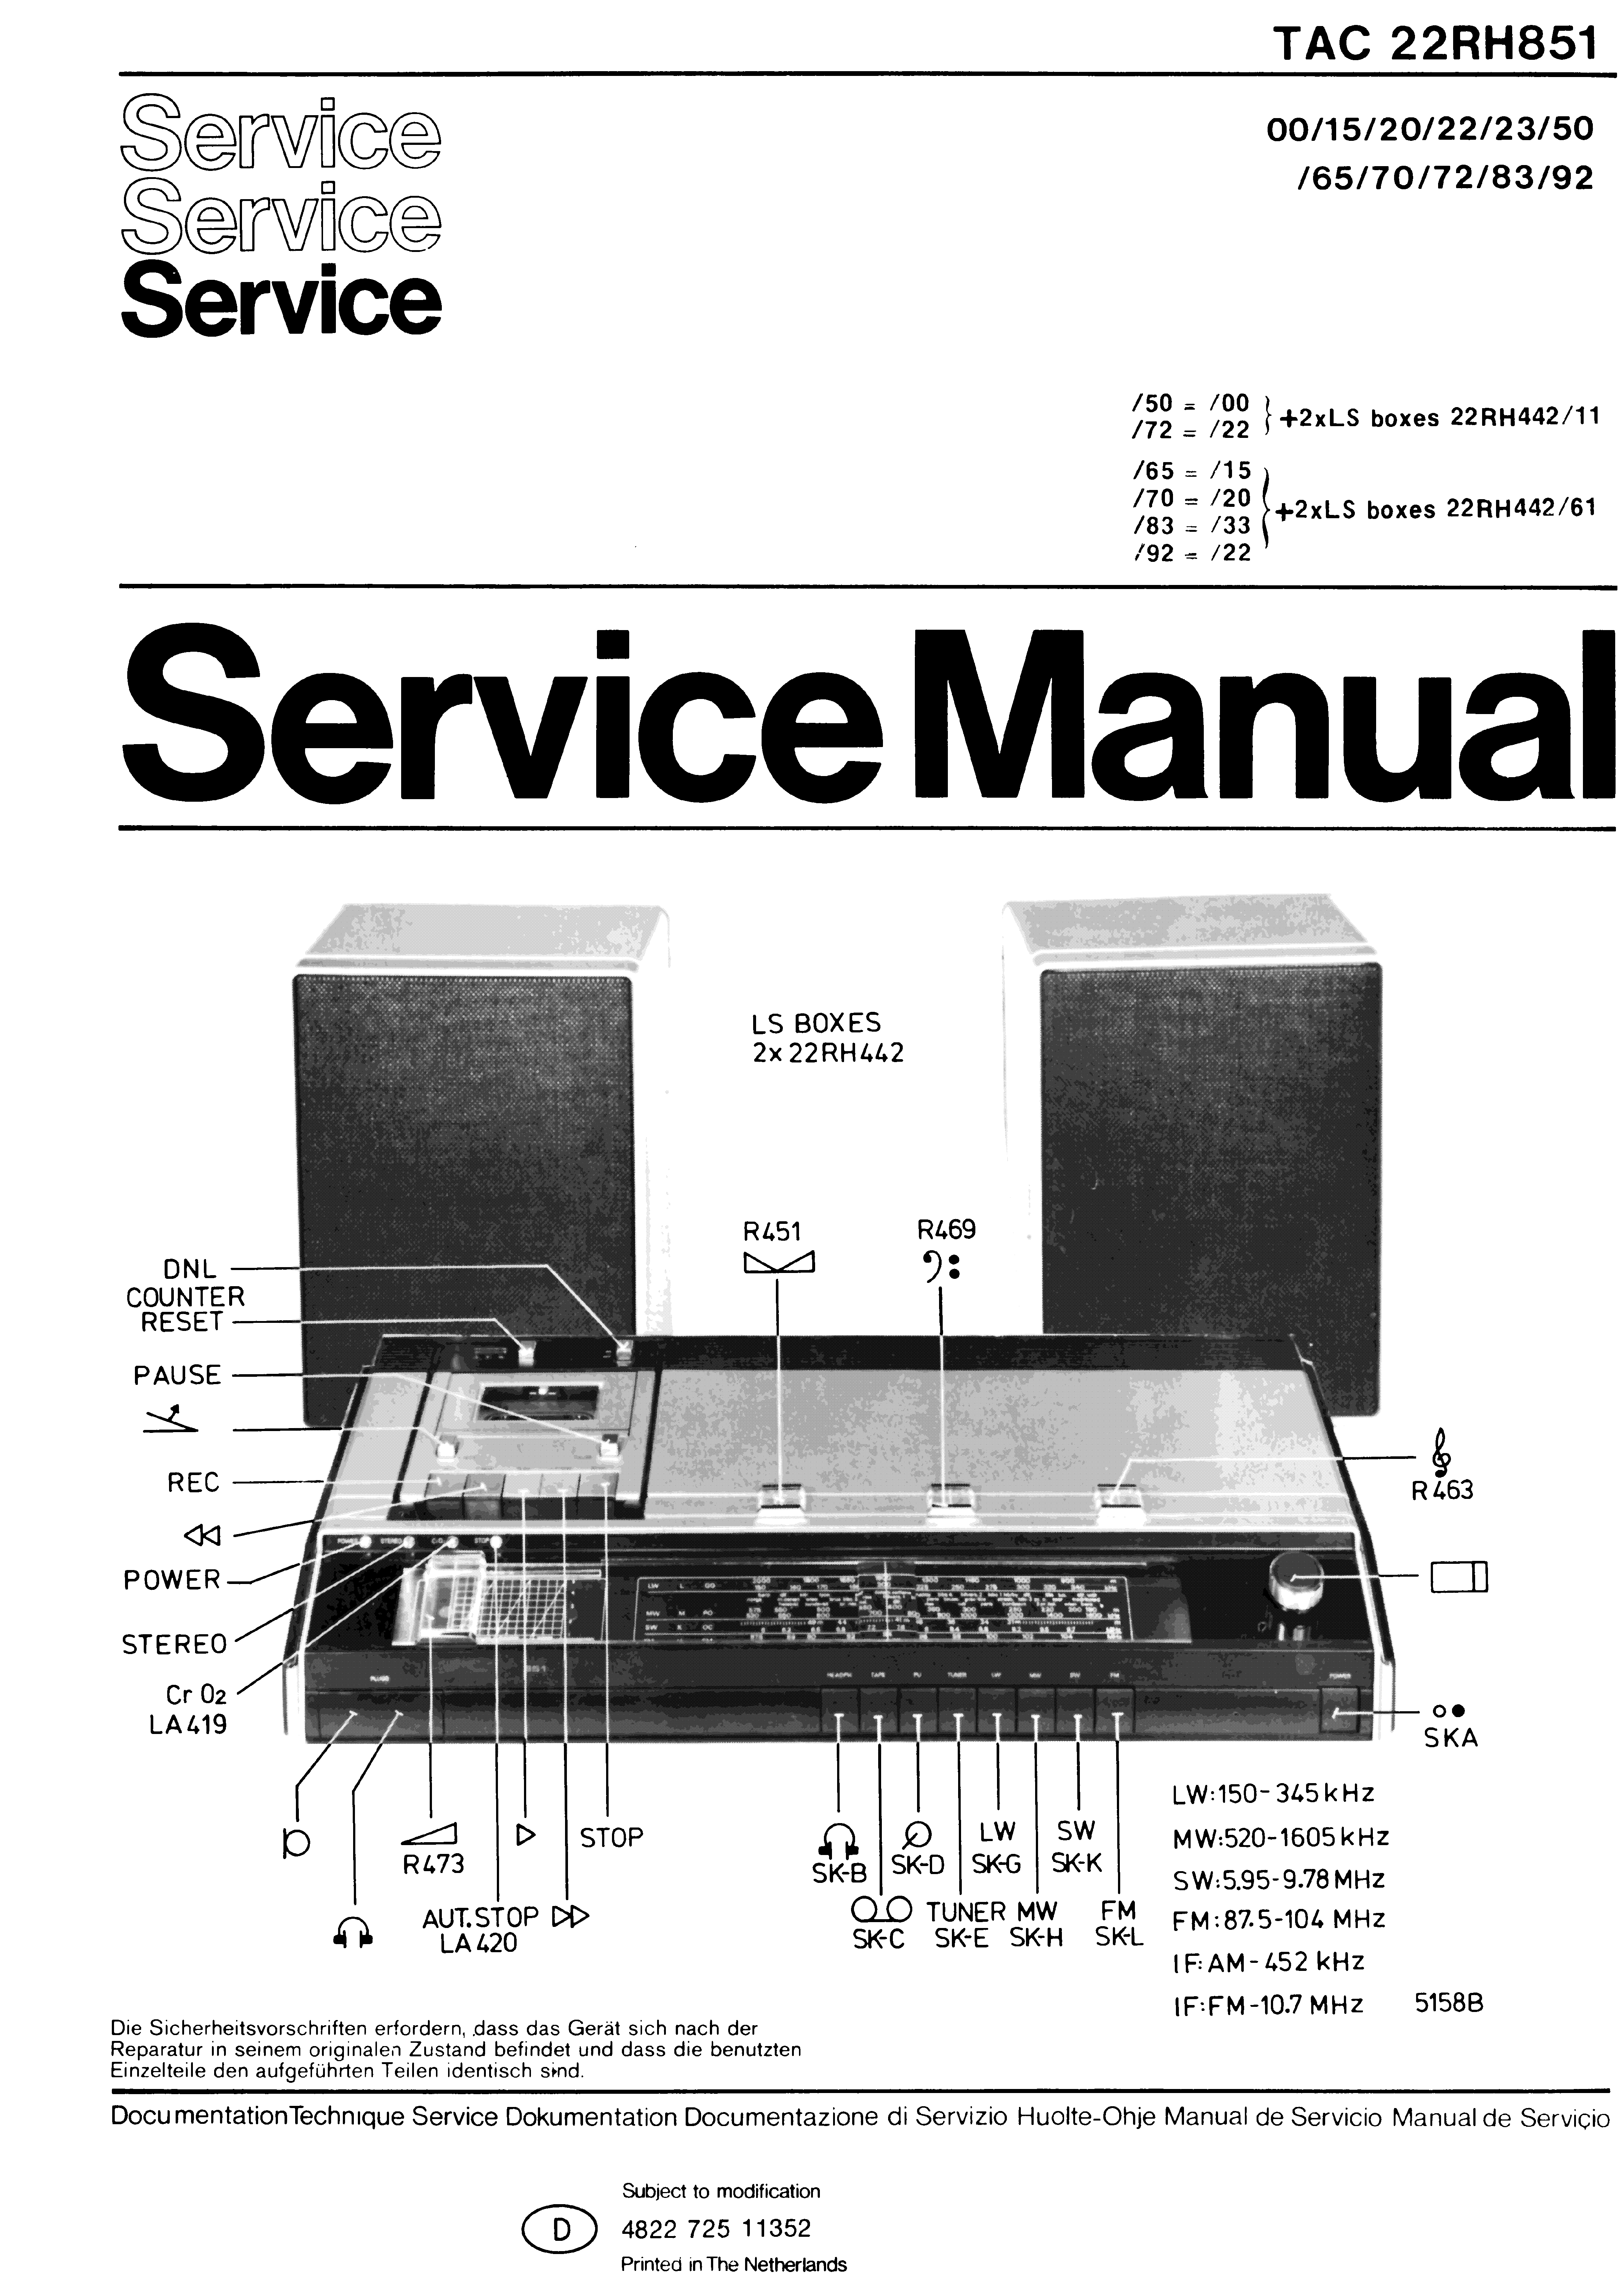 PHILIPS TAC 22RH851 SM service manual (1st page)